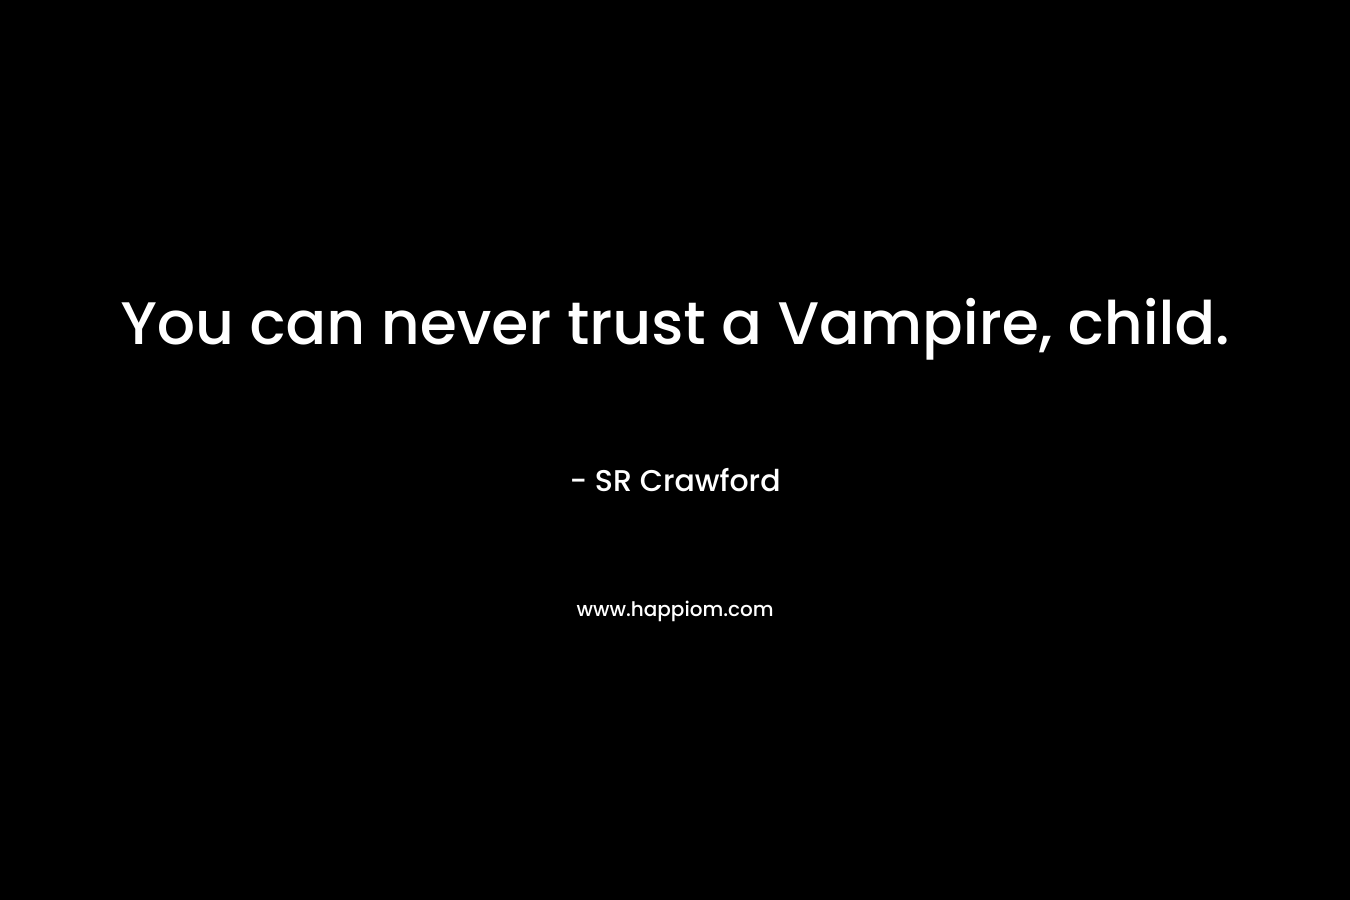 You can never trust a Vampire, child. – SR Crawford